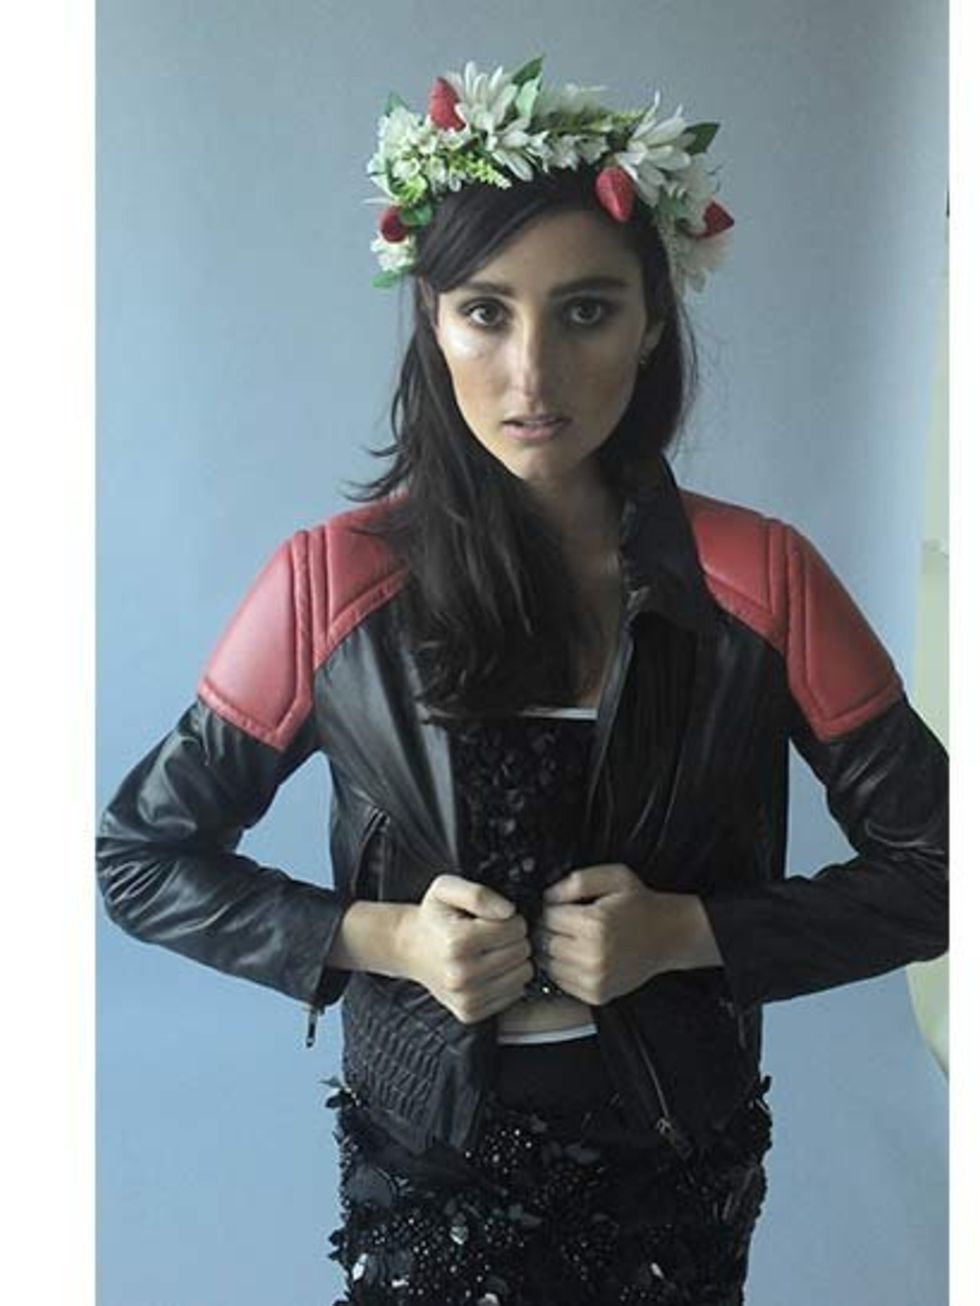 <p>Banks Wearing a floral crown by<a href="http://www.rocknrose.co.uk"> Rock'n Rose</a>. </p>